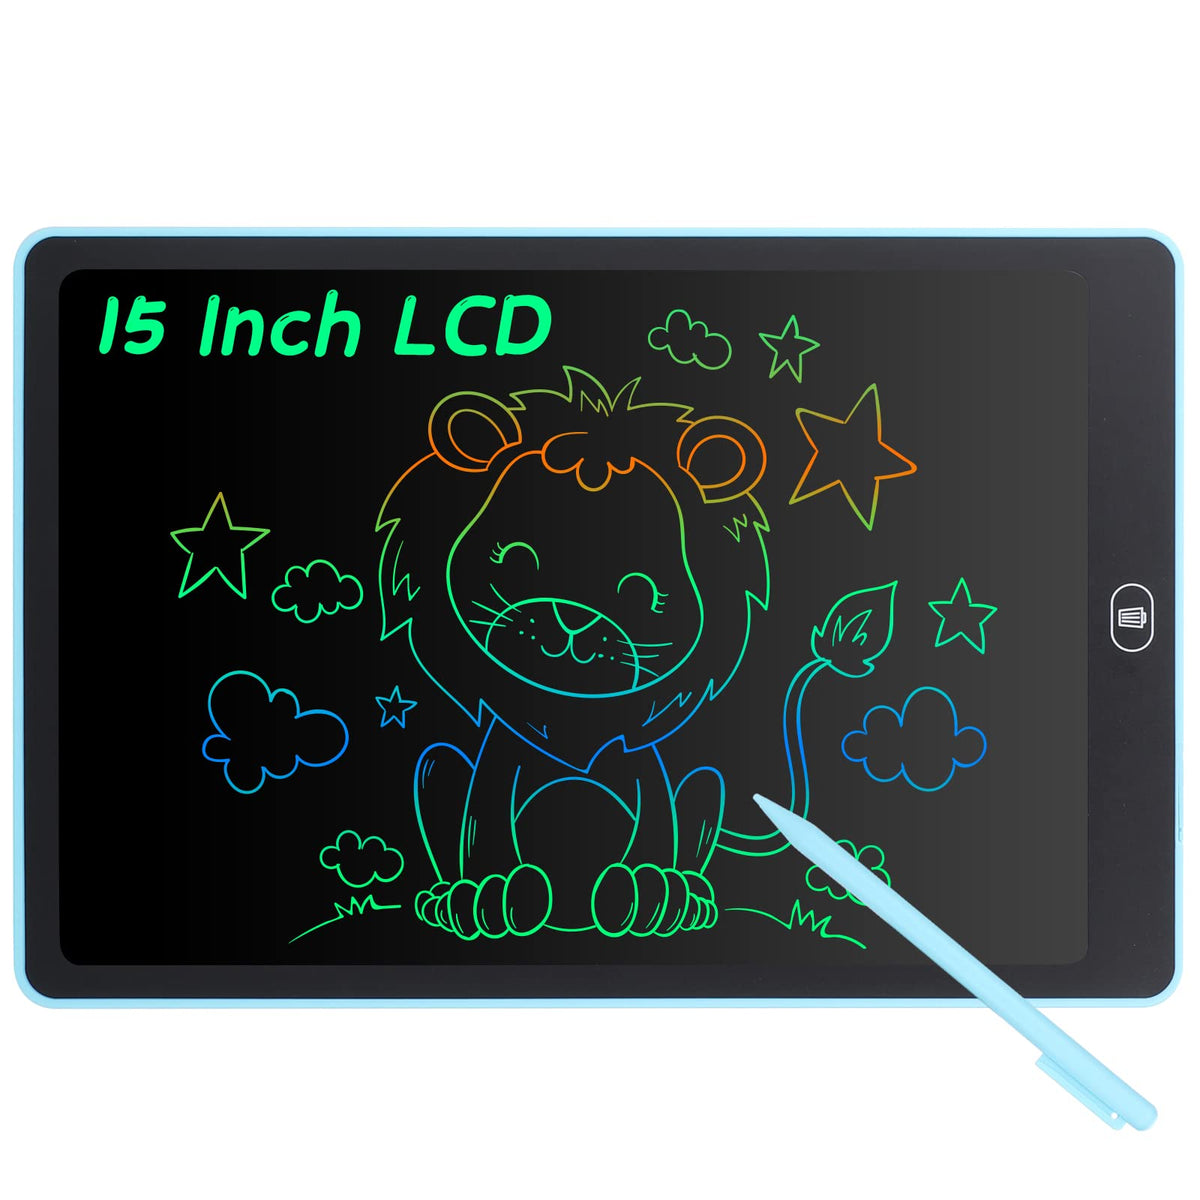 Coolzon LCD Drawing Tablet for Kids, 15 Inch Colourful Writing Pad Toddler Toys Erasable Doodle & Drawing Pad Writing Tablet Kids Travel Games for 2 3 4 5 6 7 Year Old Boys Girls (Blue)